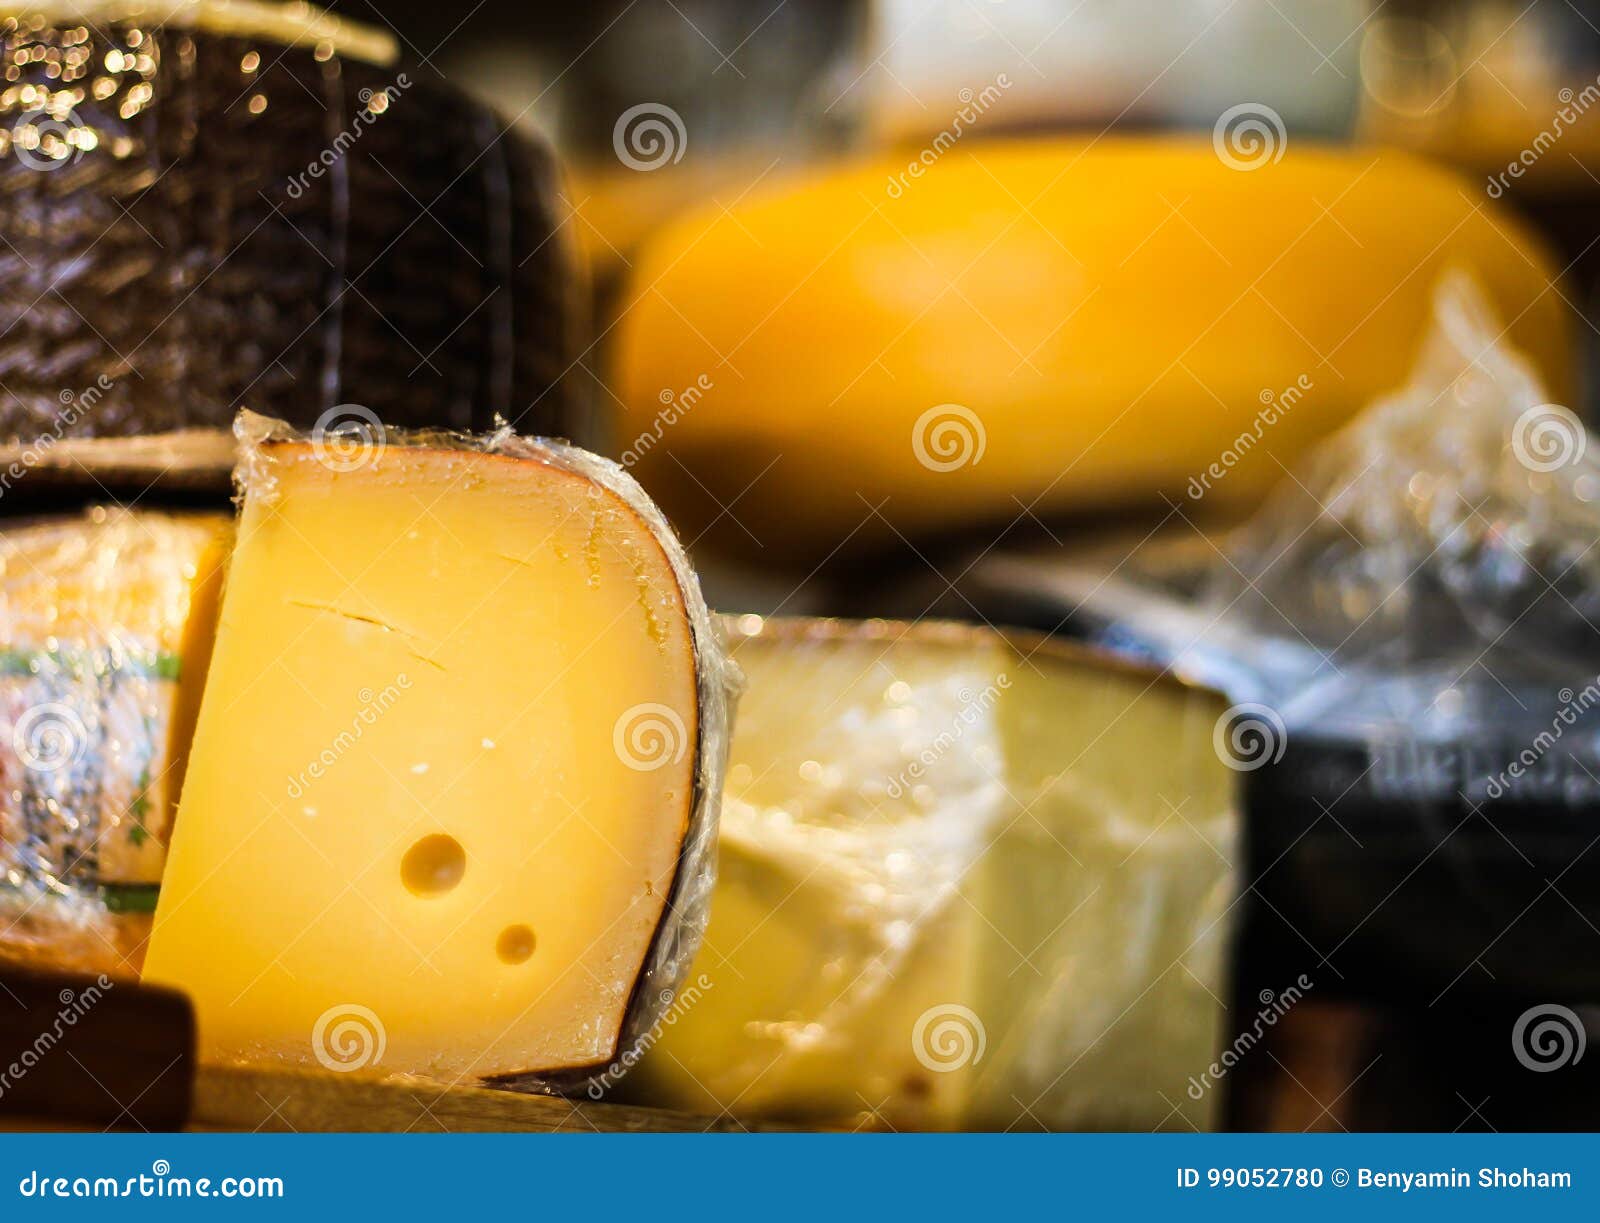 Cheese Wheels Stacked at the Deli Stock Photo - Image of restaurant